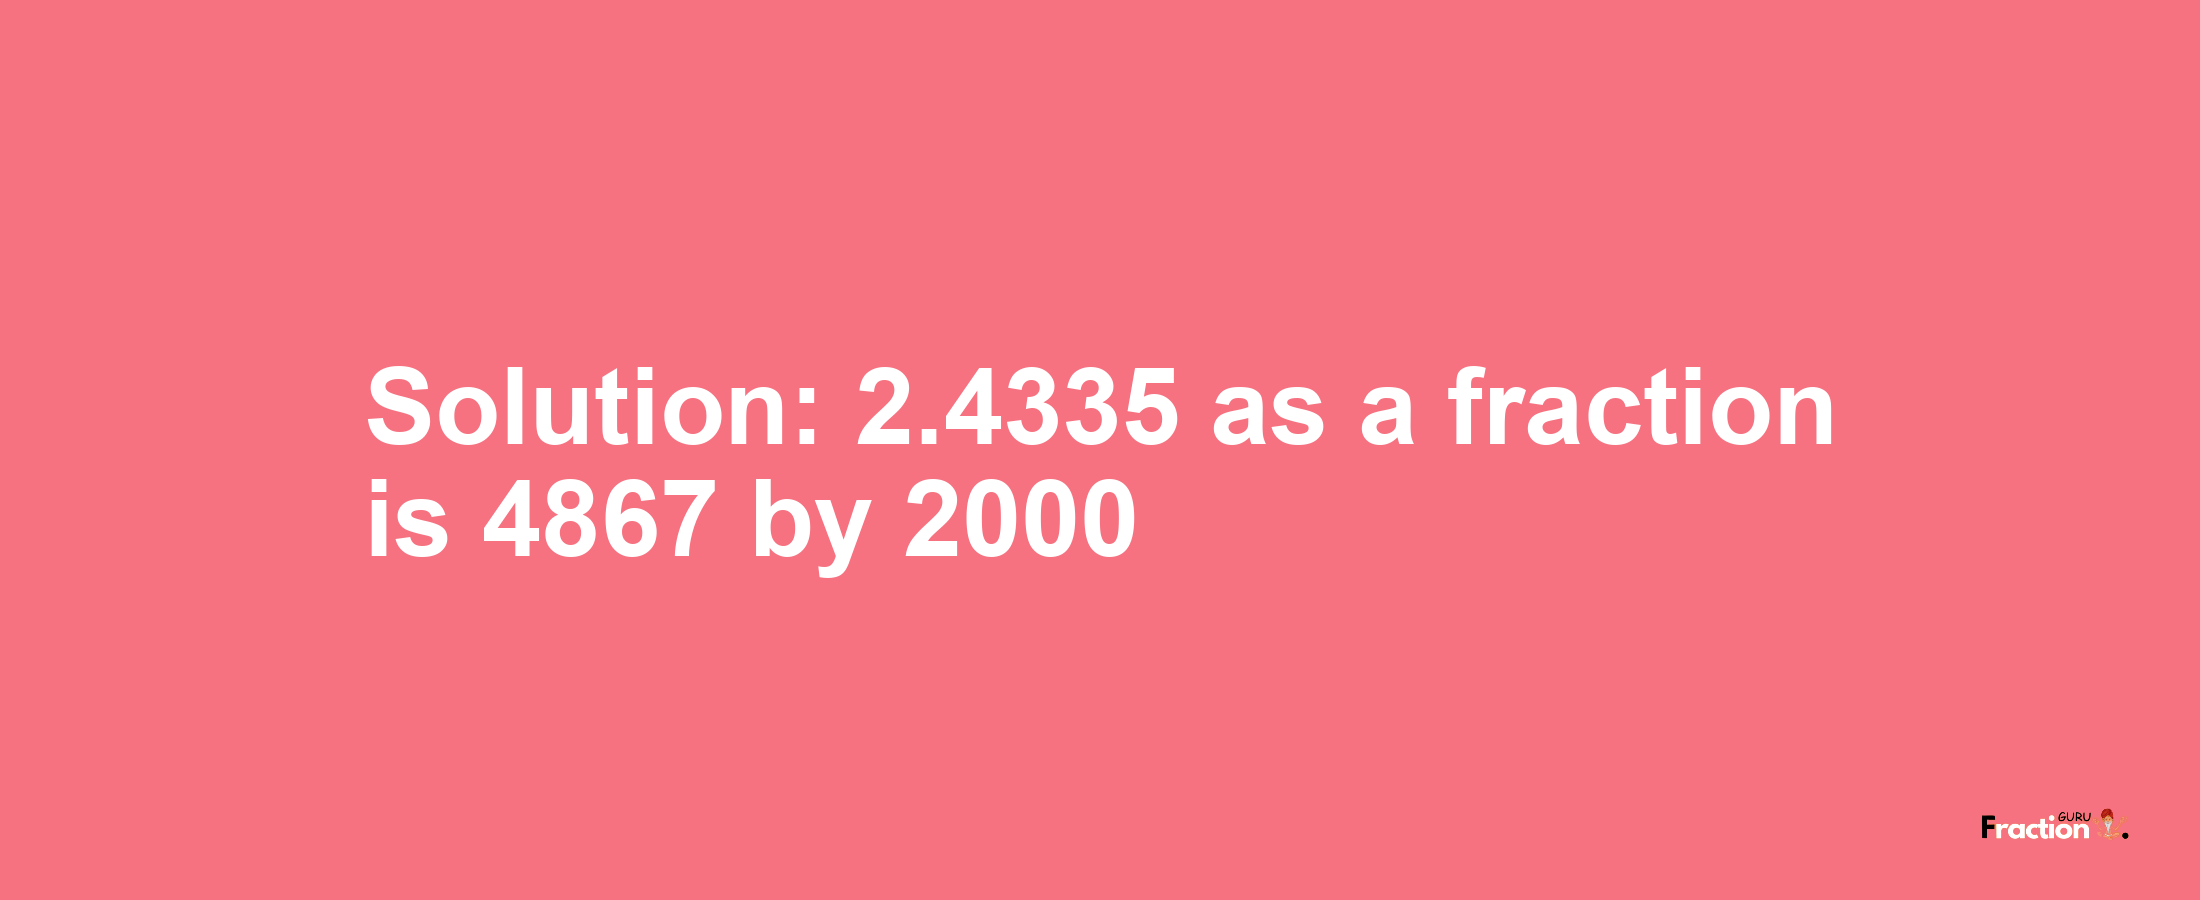 Solution:2.4335 as a fraction is 4867/2000